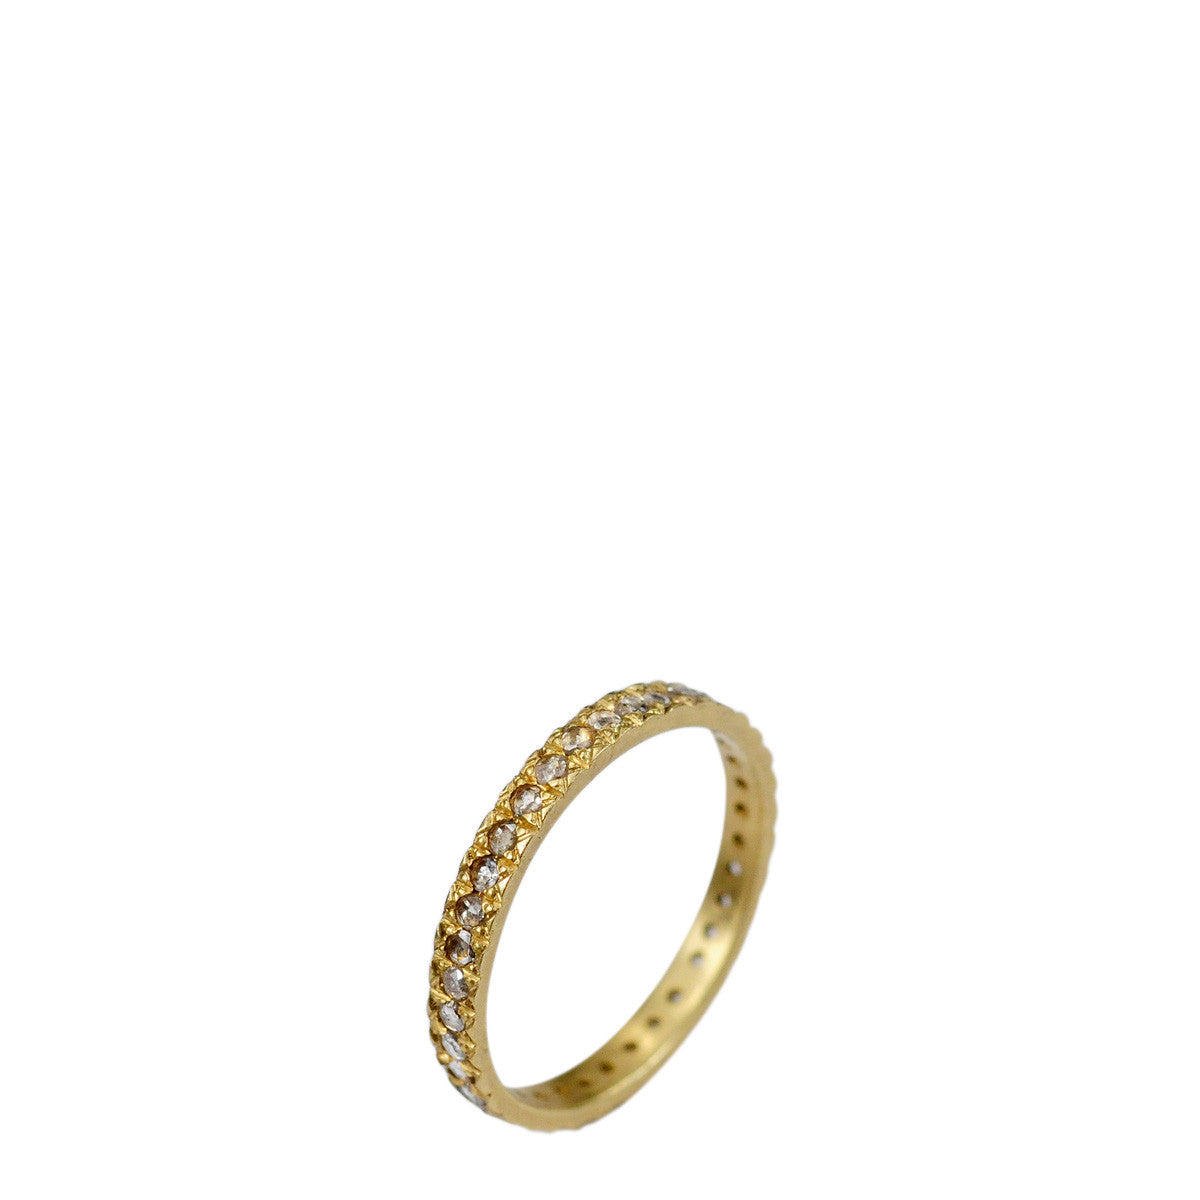 18K Gold 3.5mm Band with 2.5mm Indian Diamonds